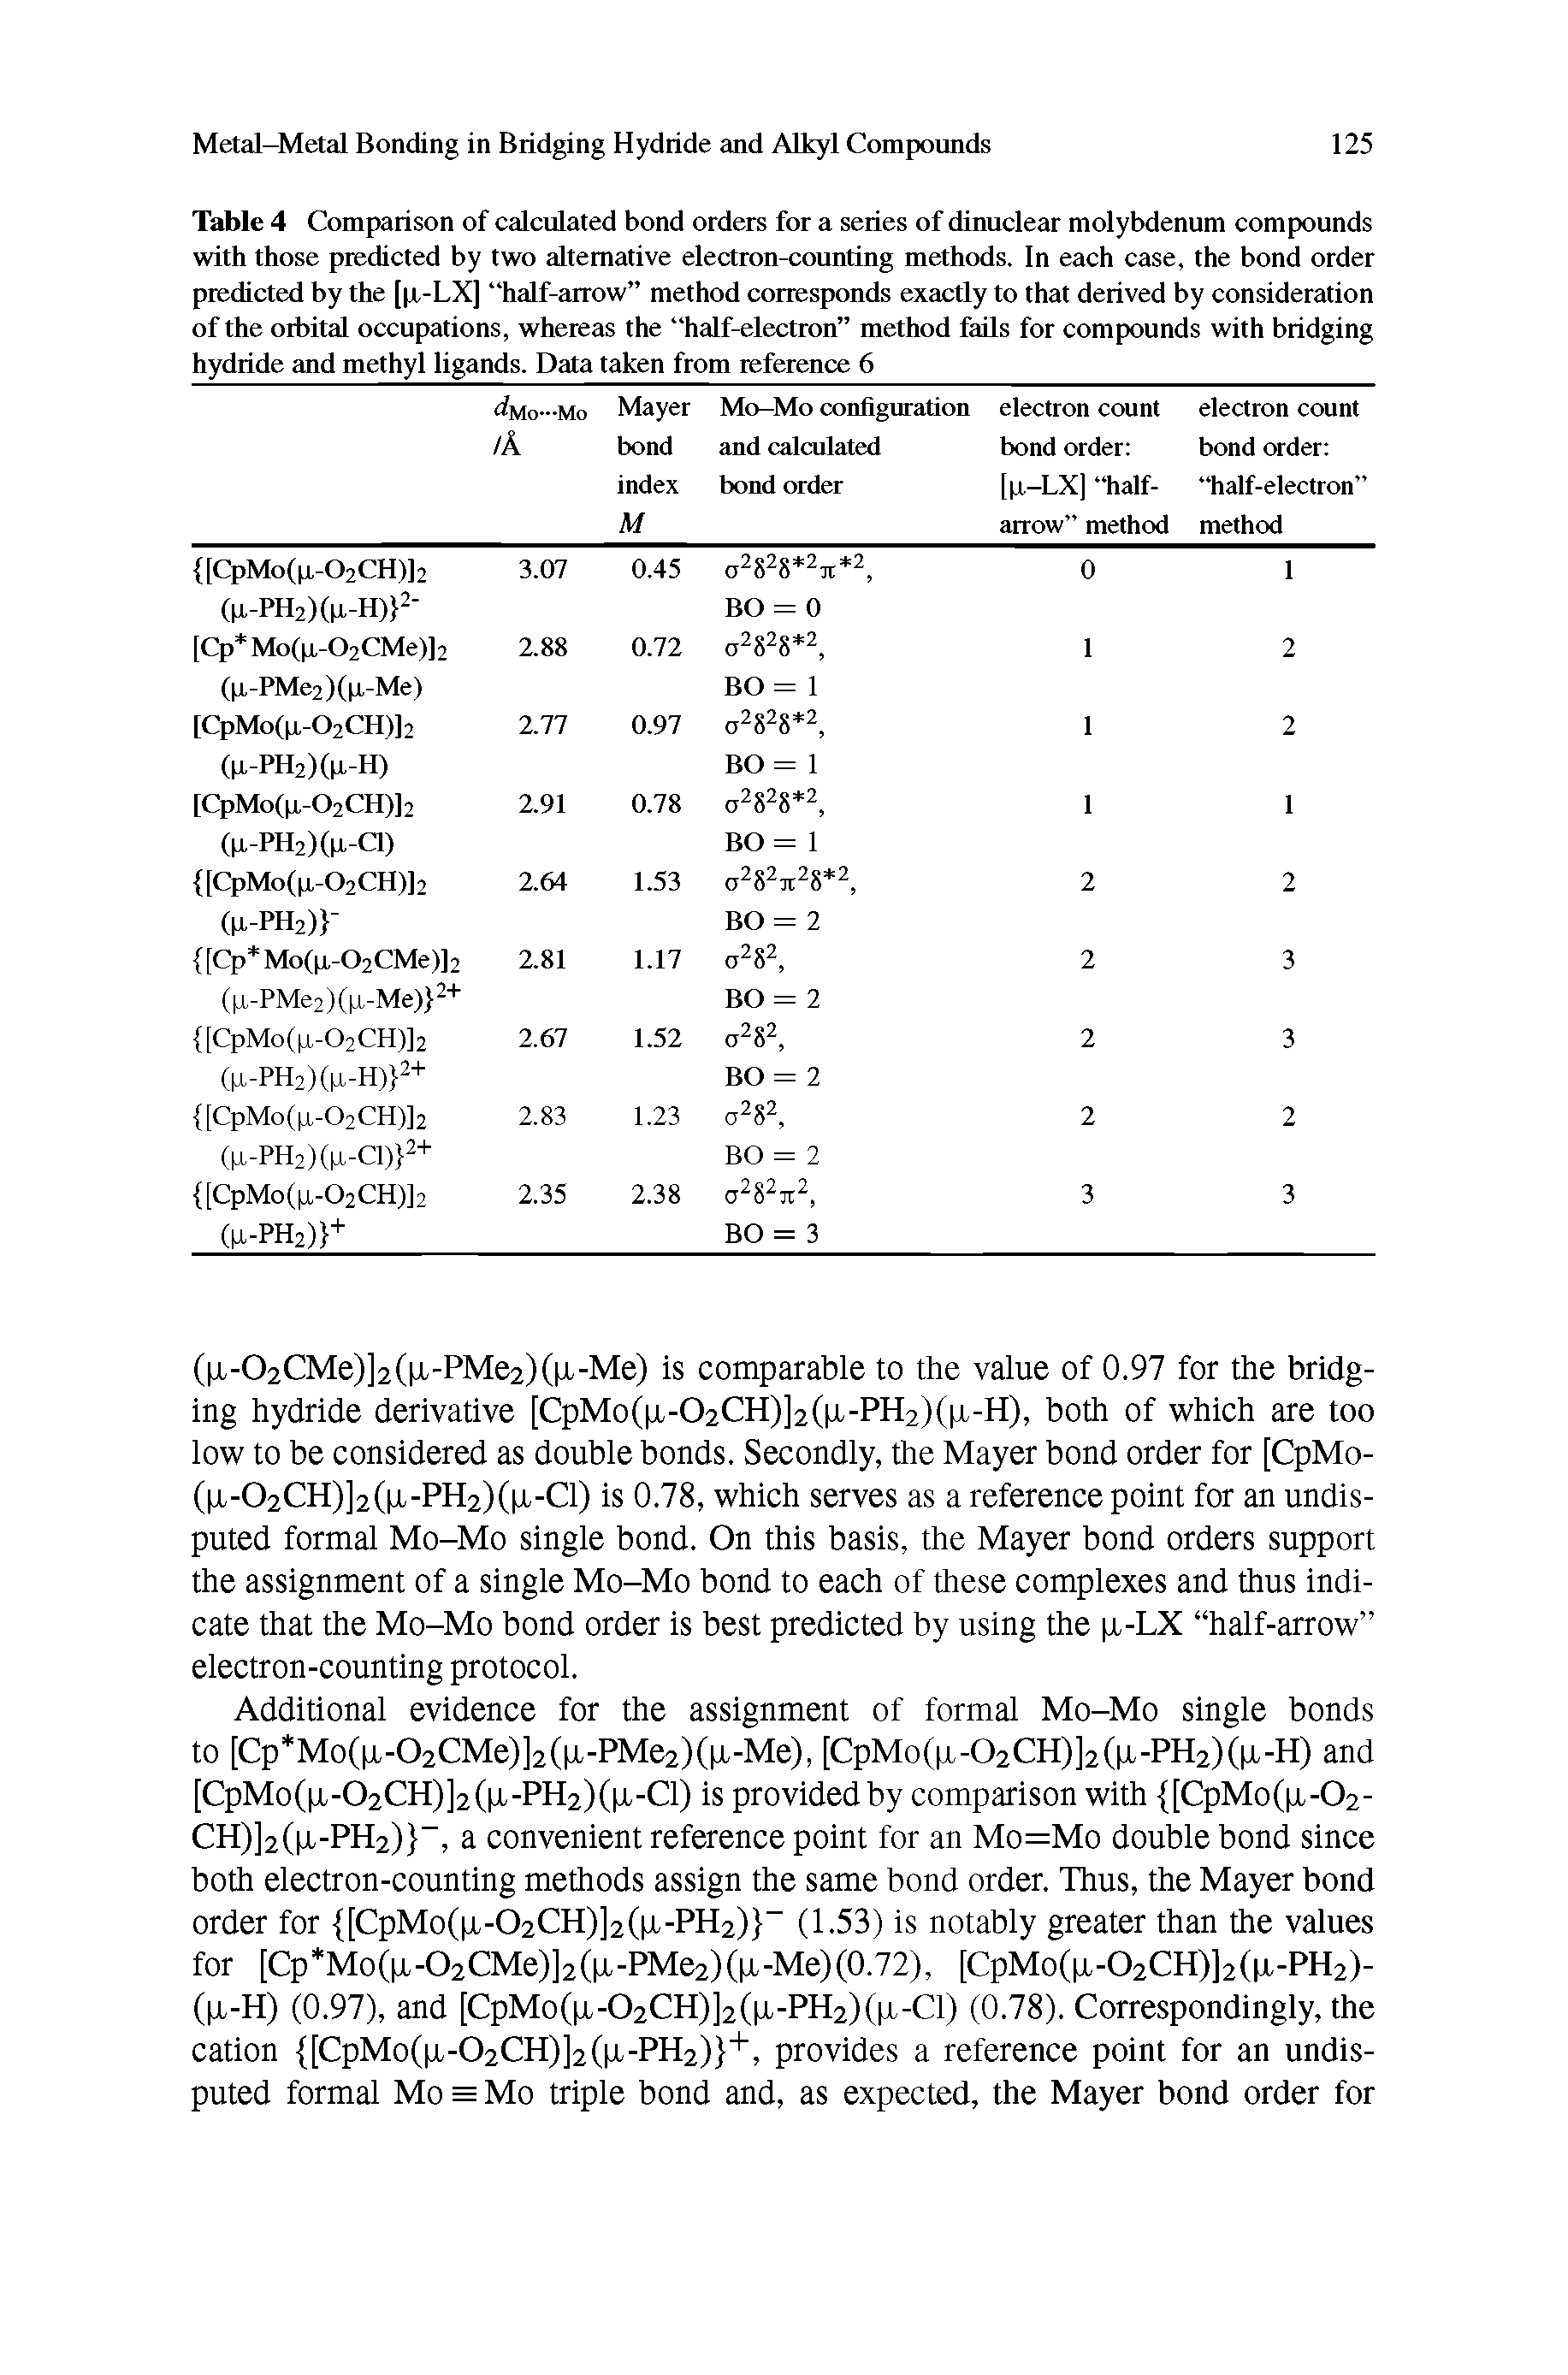 Table 4 Comparison of calculated bond orders for a series of dinuclear molybdenum compounds with those predicted by two alternative electron-counting methods. In each case, the bond order predicted by the [p.-LX] half-arrow method corresponds exactly to that derived by consideration of the orbital occupations, whereas the half-electron method fails for compounds with bridging hydride and methyl ligands. Data ttiken from reference 6...